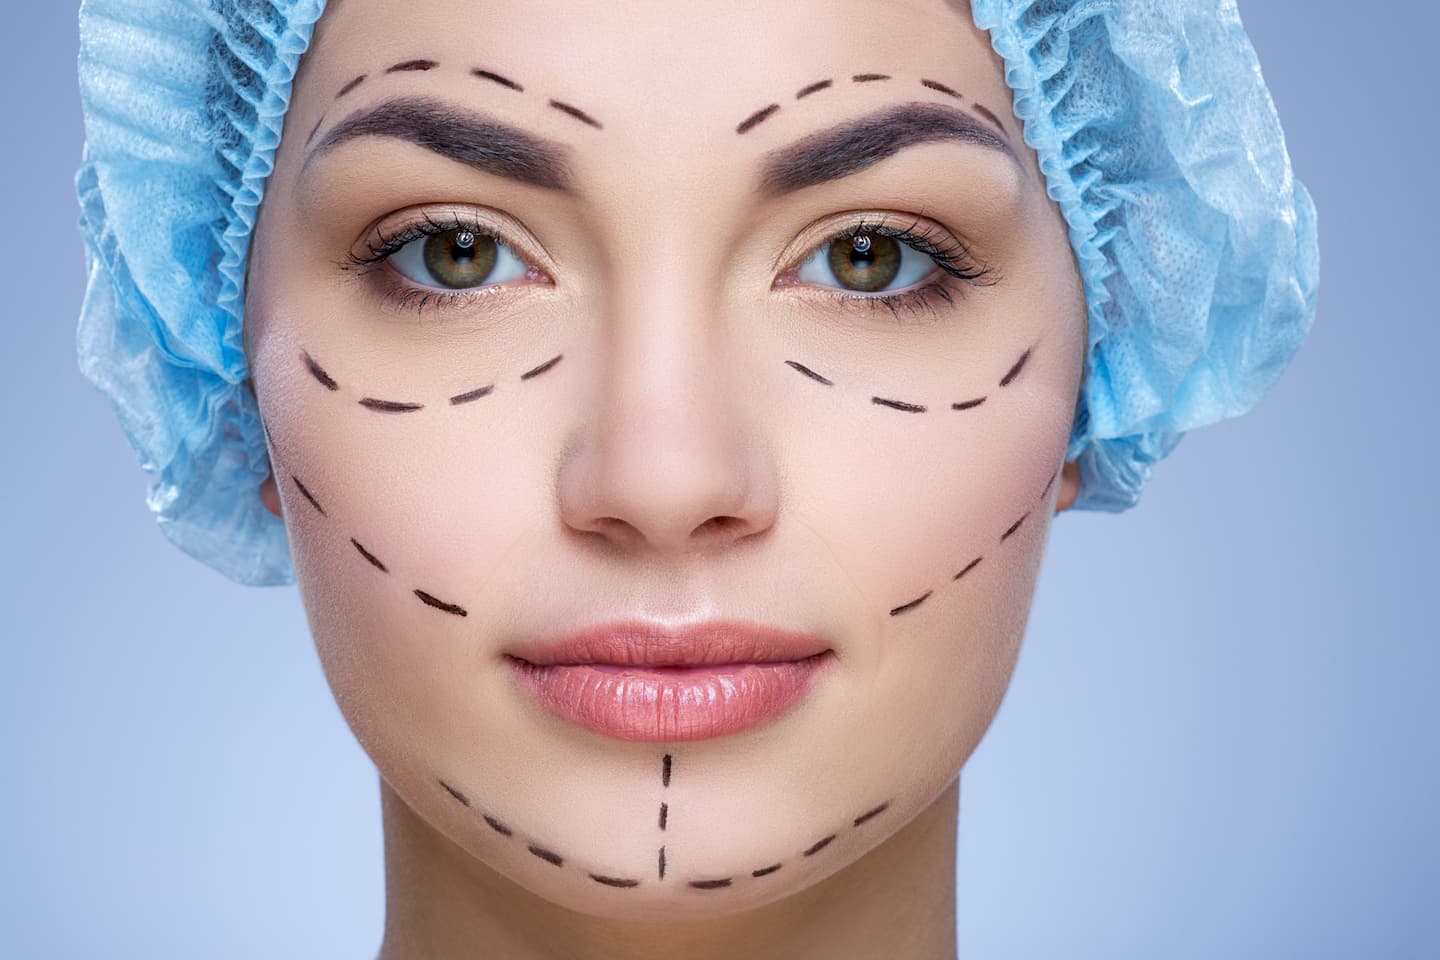 Age for Plastic Surgery